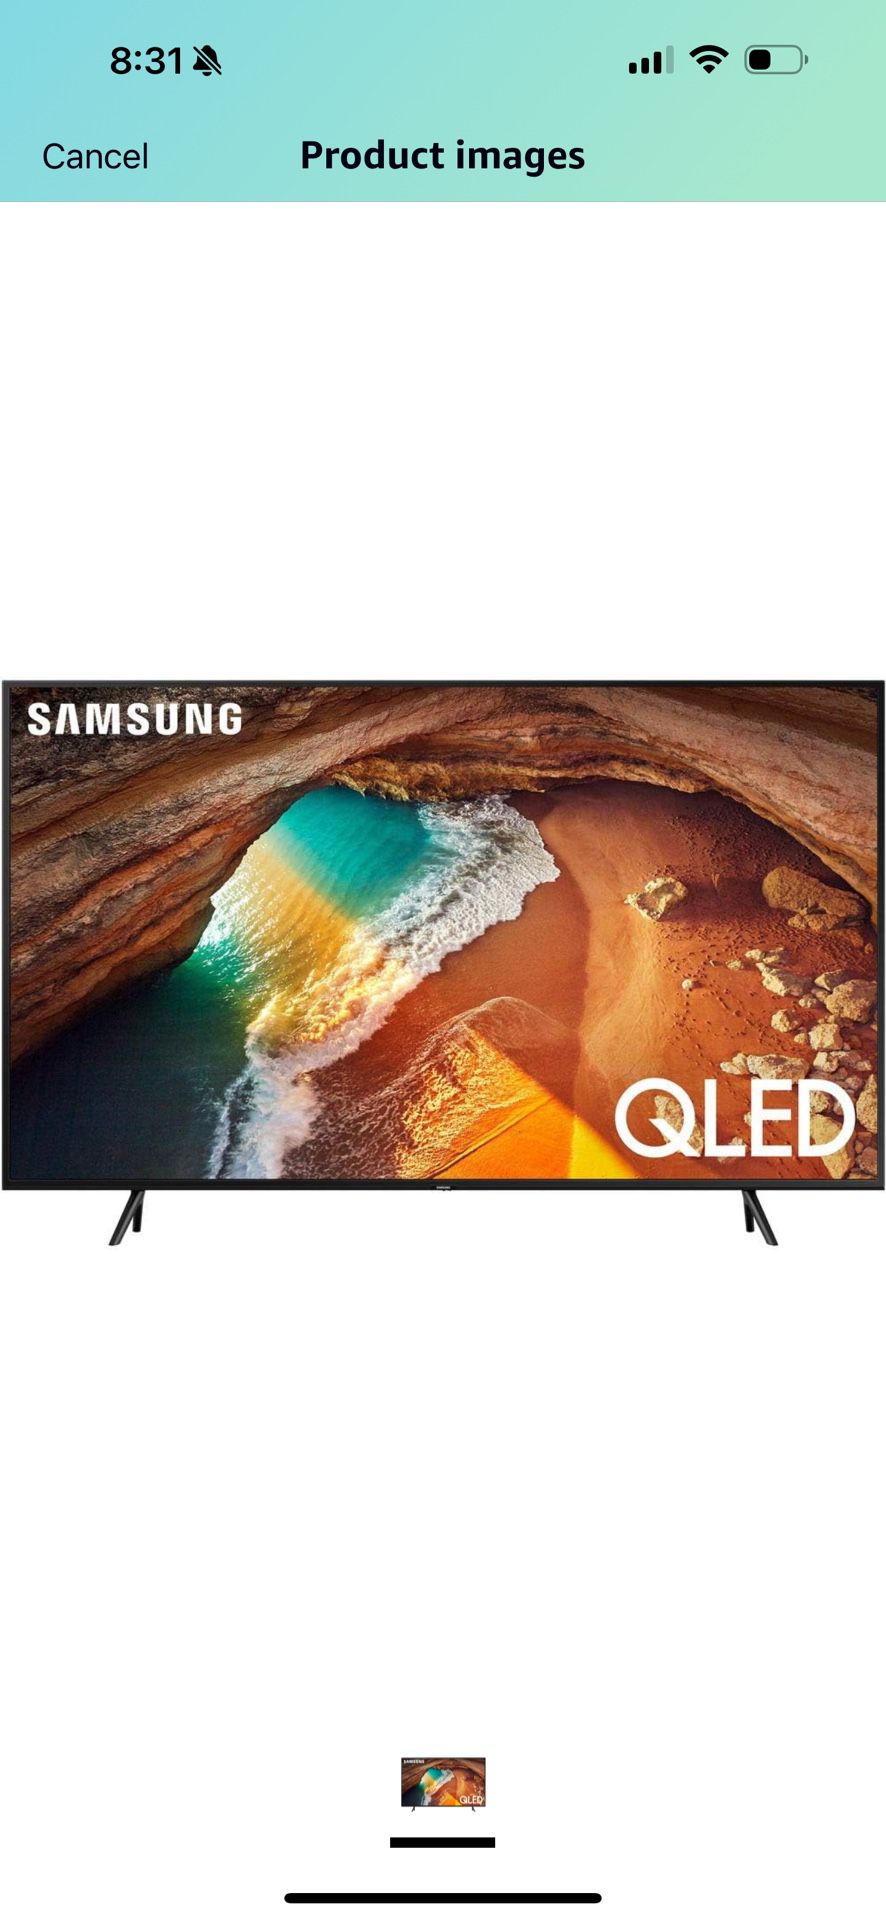 Tv- Samsung  Flat 82-Inch QLED 4K Q60 Series Ultra HD Smart TV with HDR and Alexa Compatibility